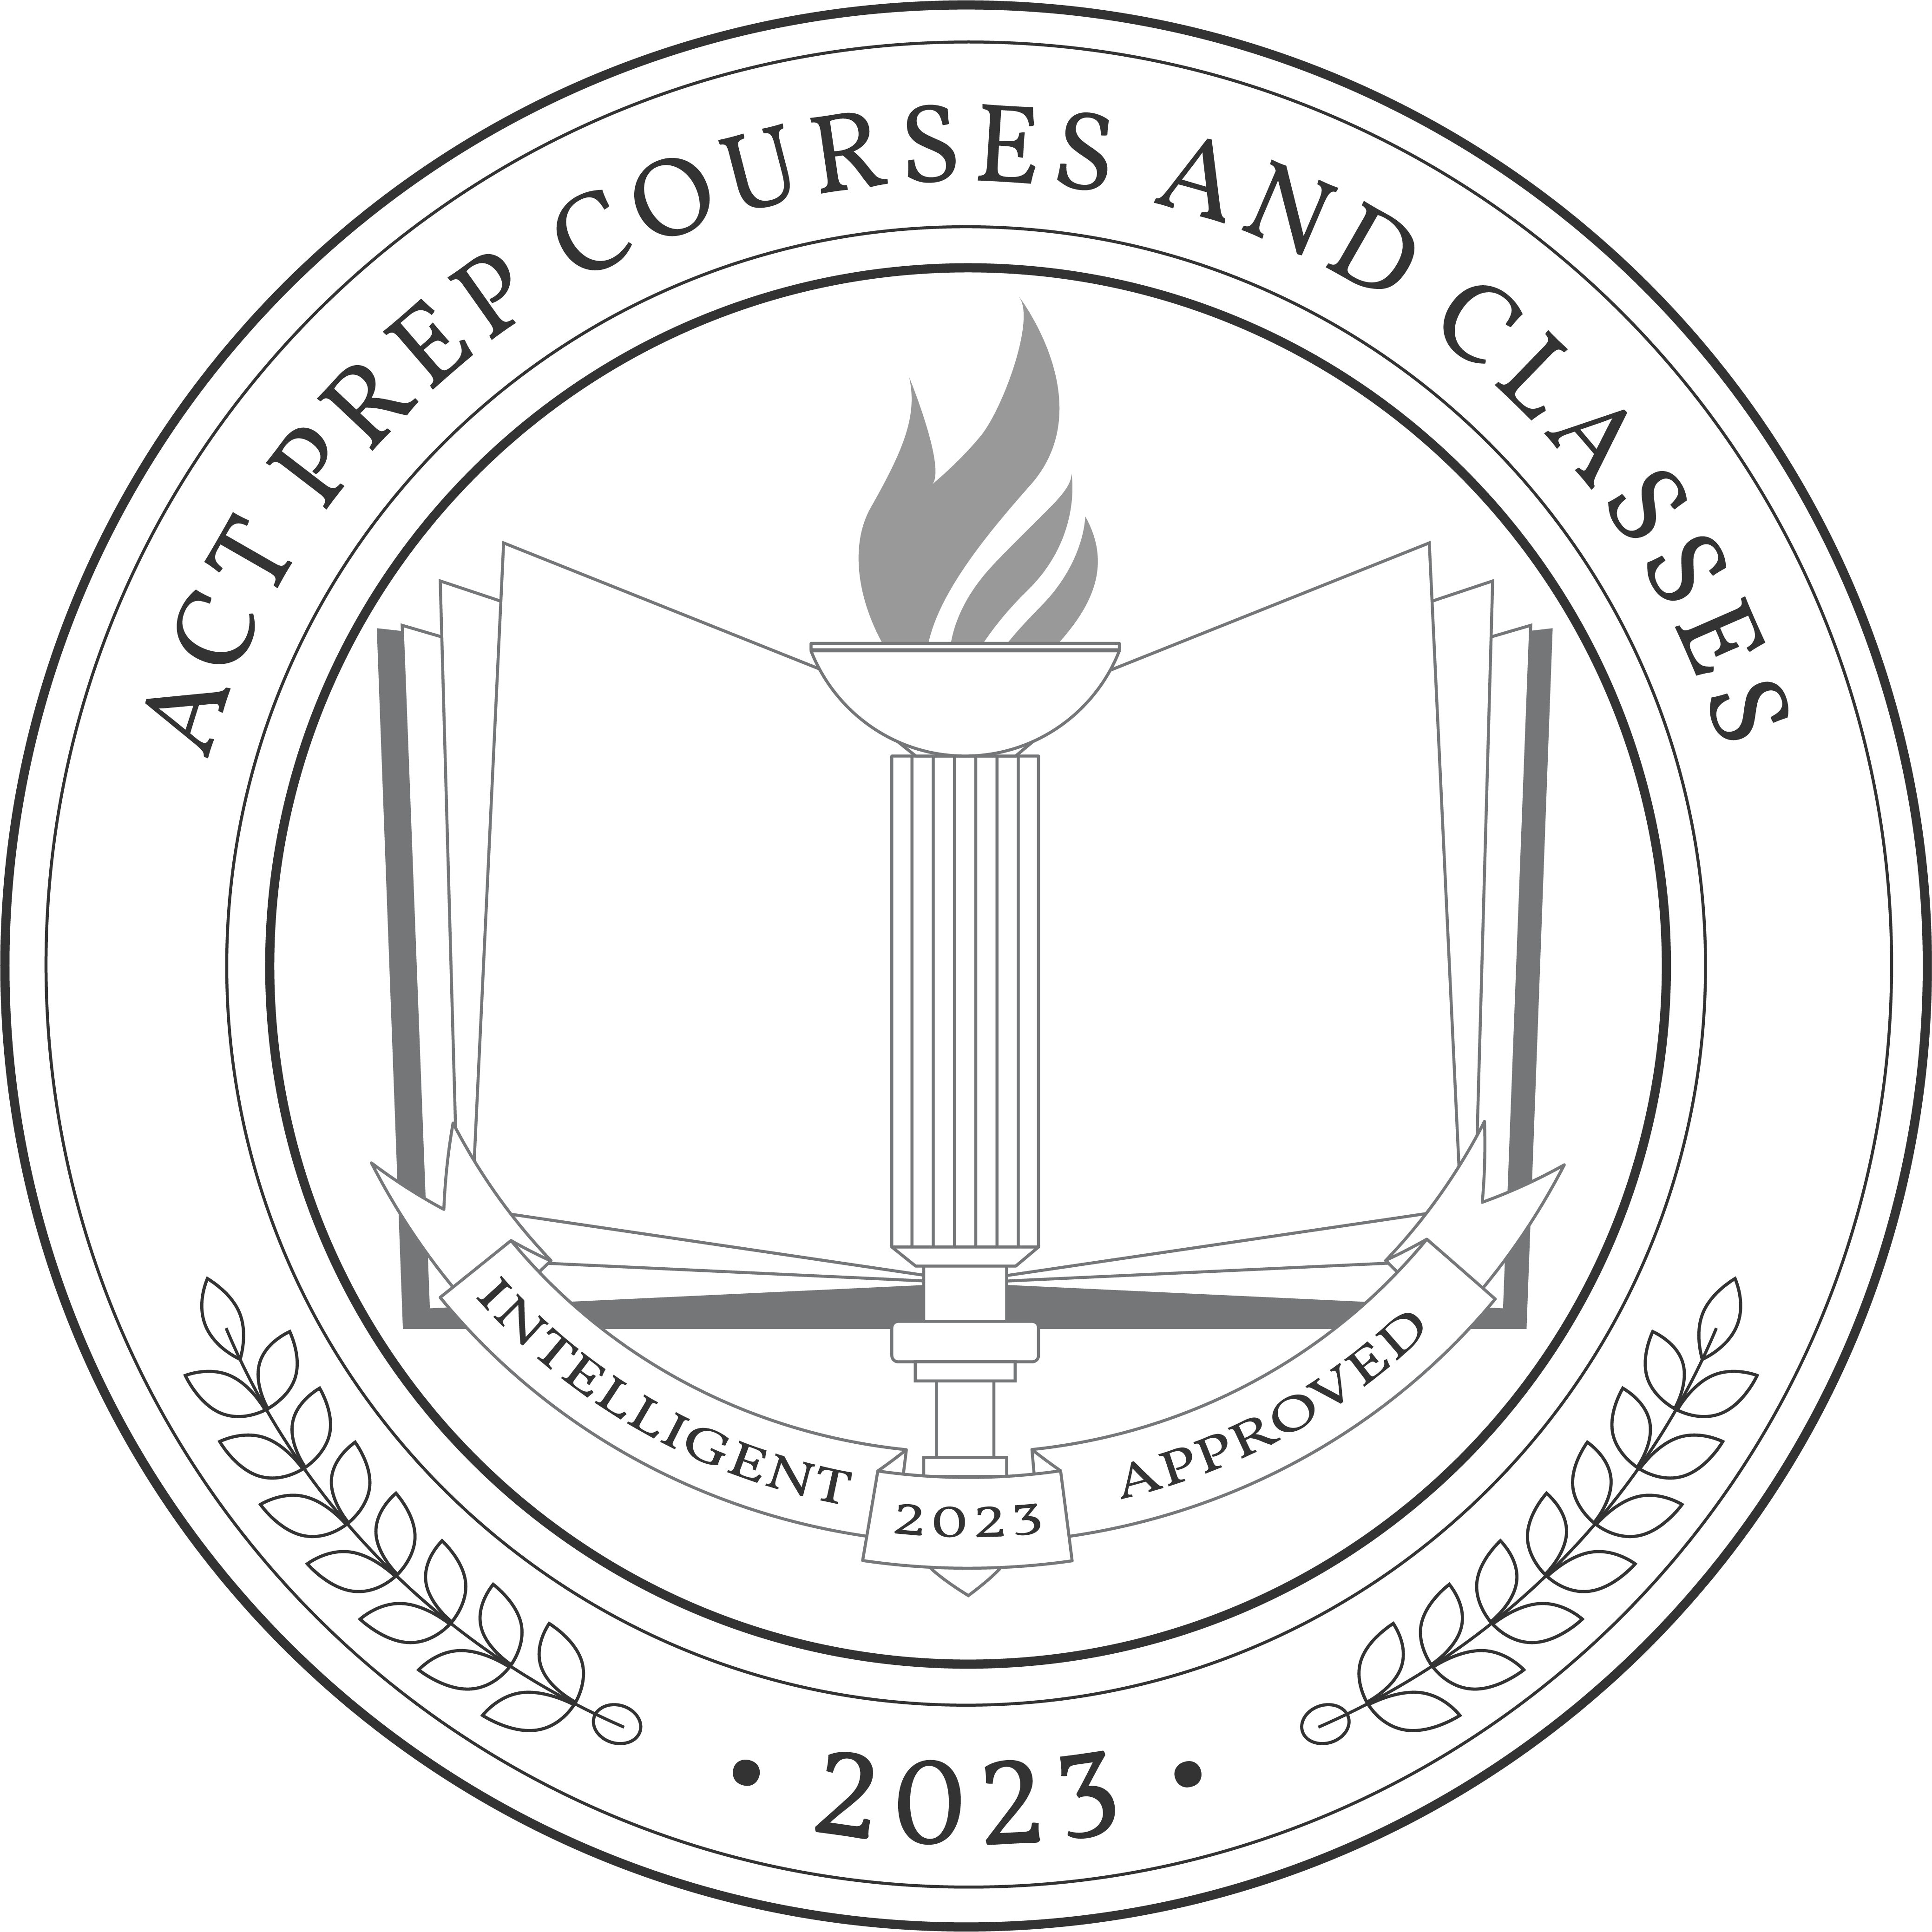 ACT Prep Courses and Classes Badge